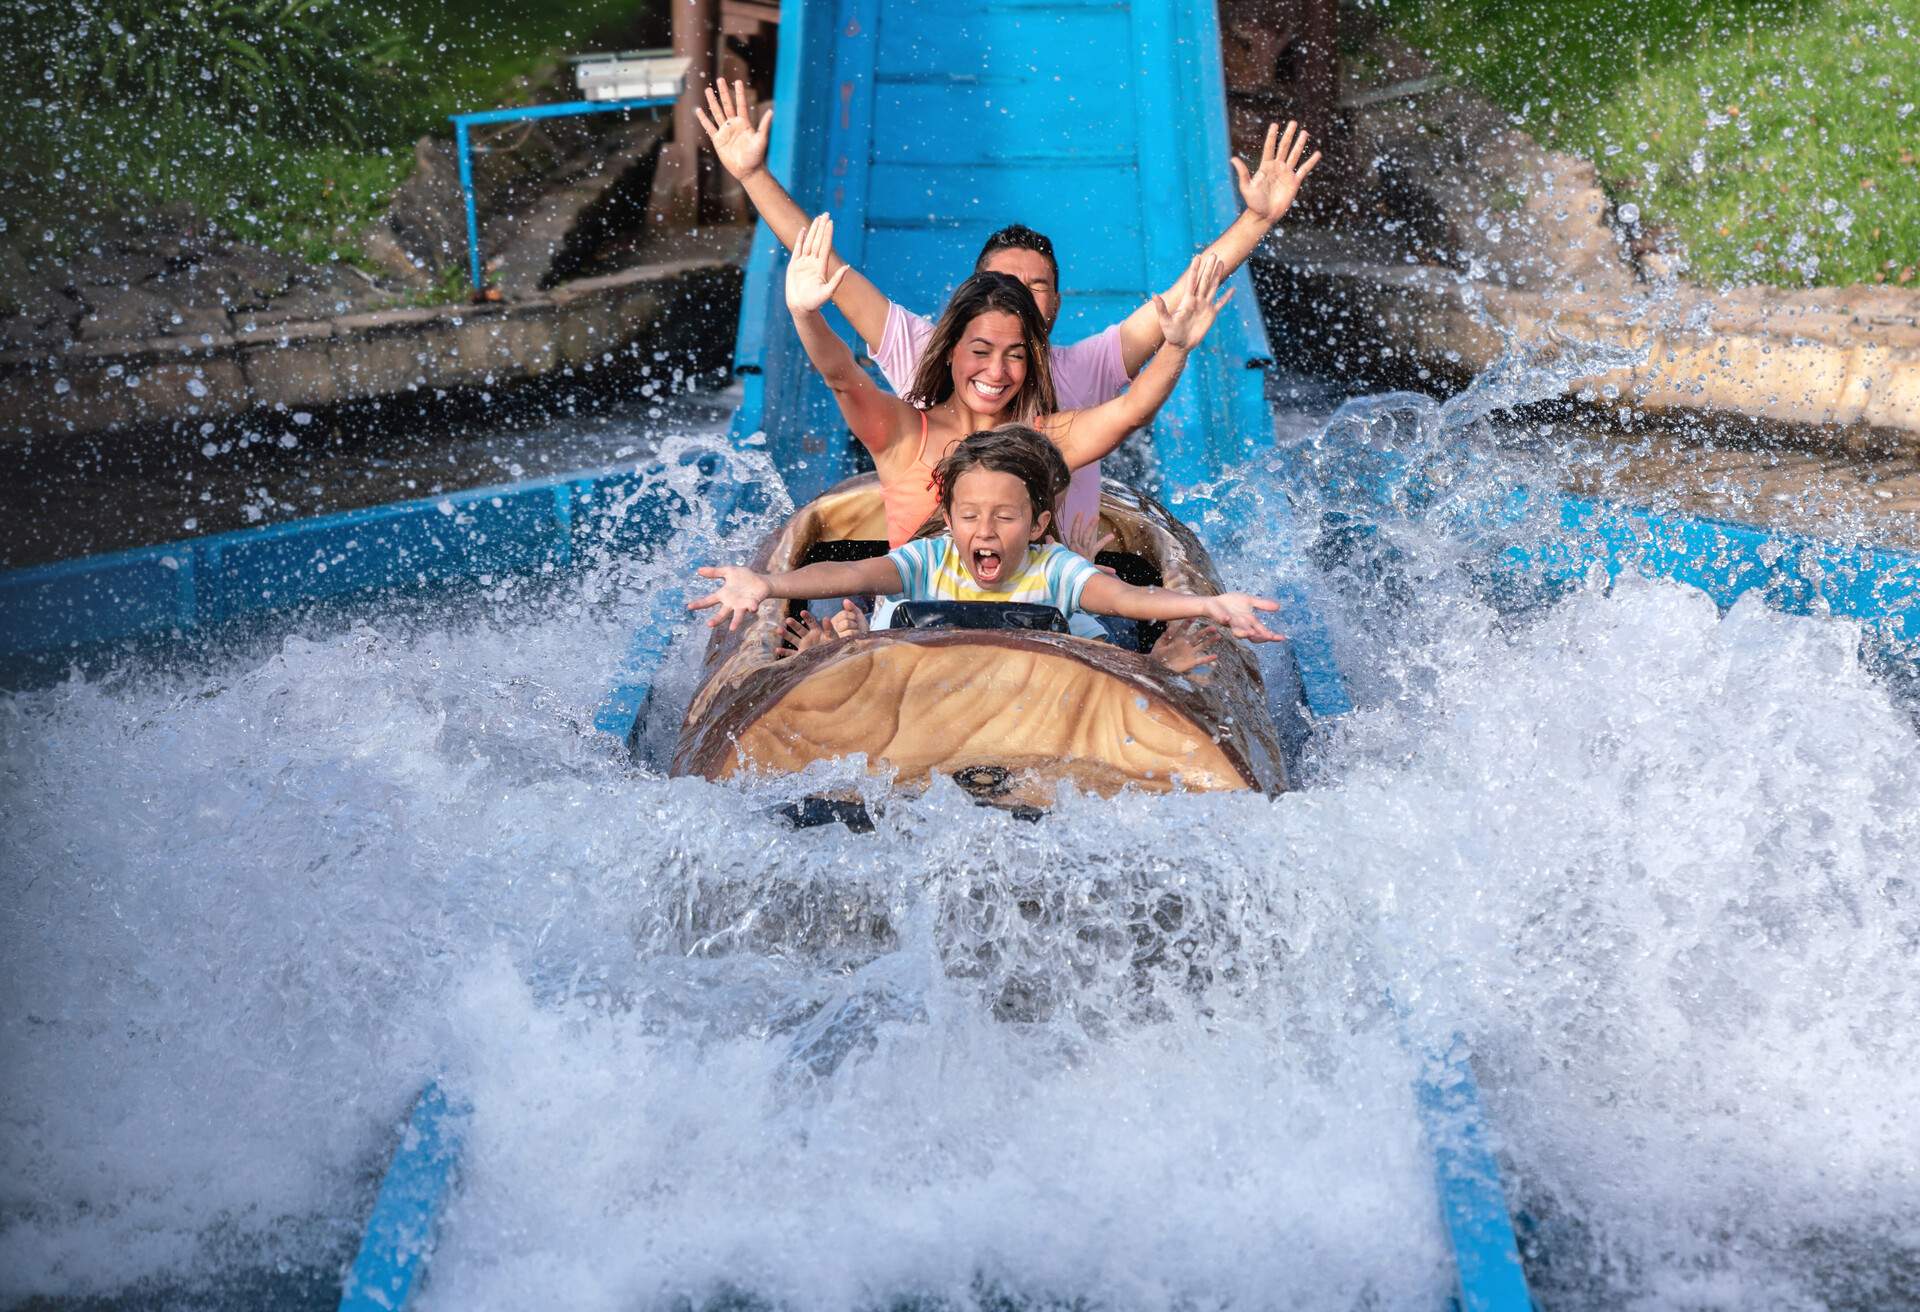 Happy family having fun in an amusement park riding on a fun water ride - lifestyle concepts.